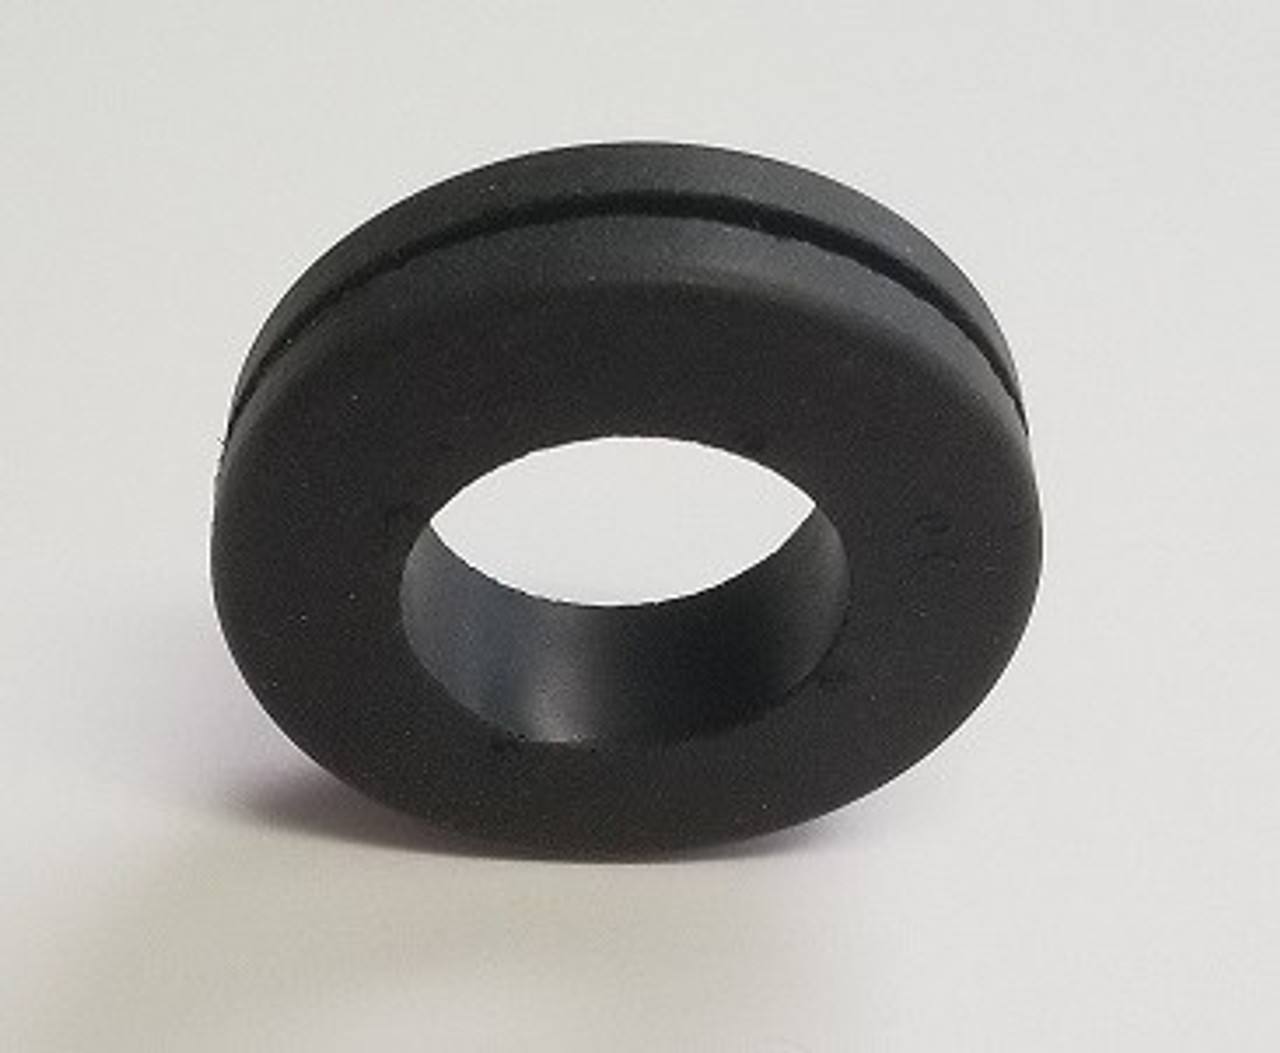 Looking for Zenith Front Section Rod Black Rubber Washer, zenith front section rod washer, zenith fs rod washer, Zenith Power Front Black Rubber Washer, Zenith PF Black Rubber Washer, Zenith Power Front Section Washer, Front Section Rod Washer, Zenith parts?